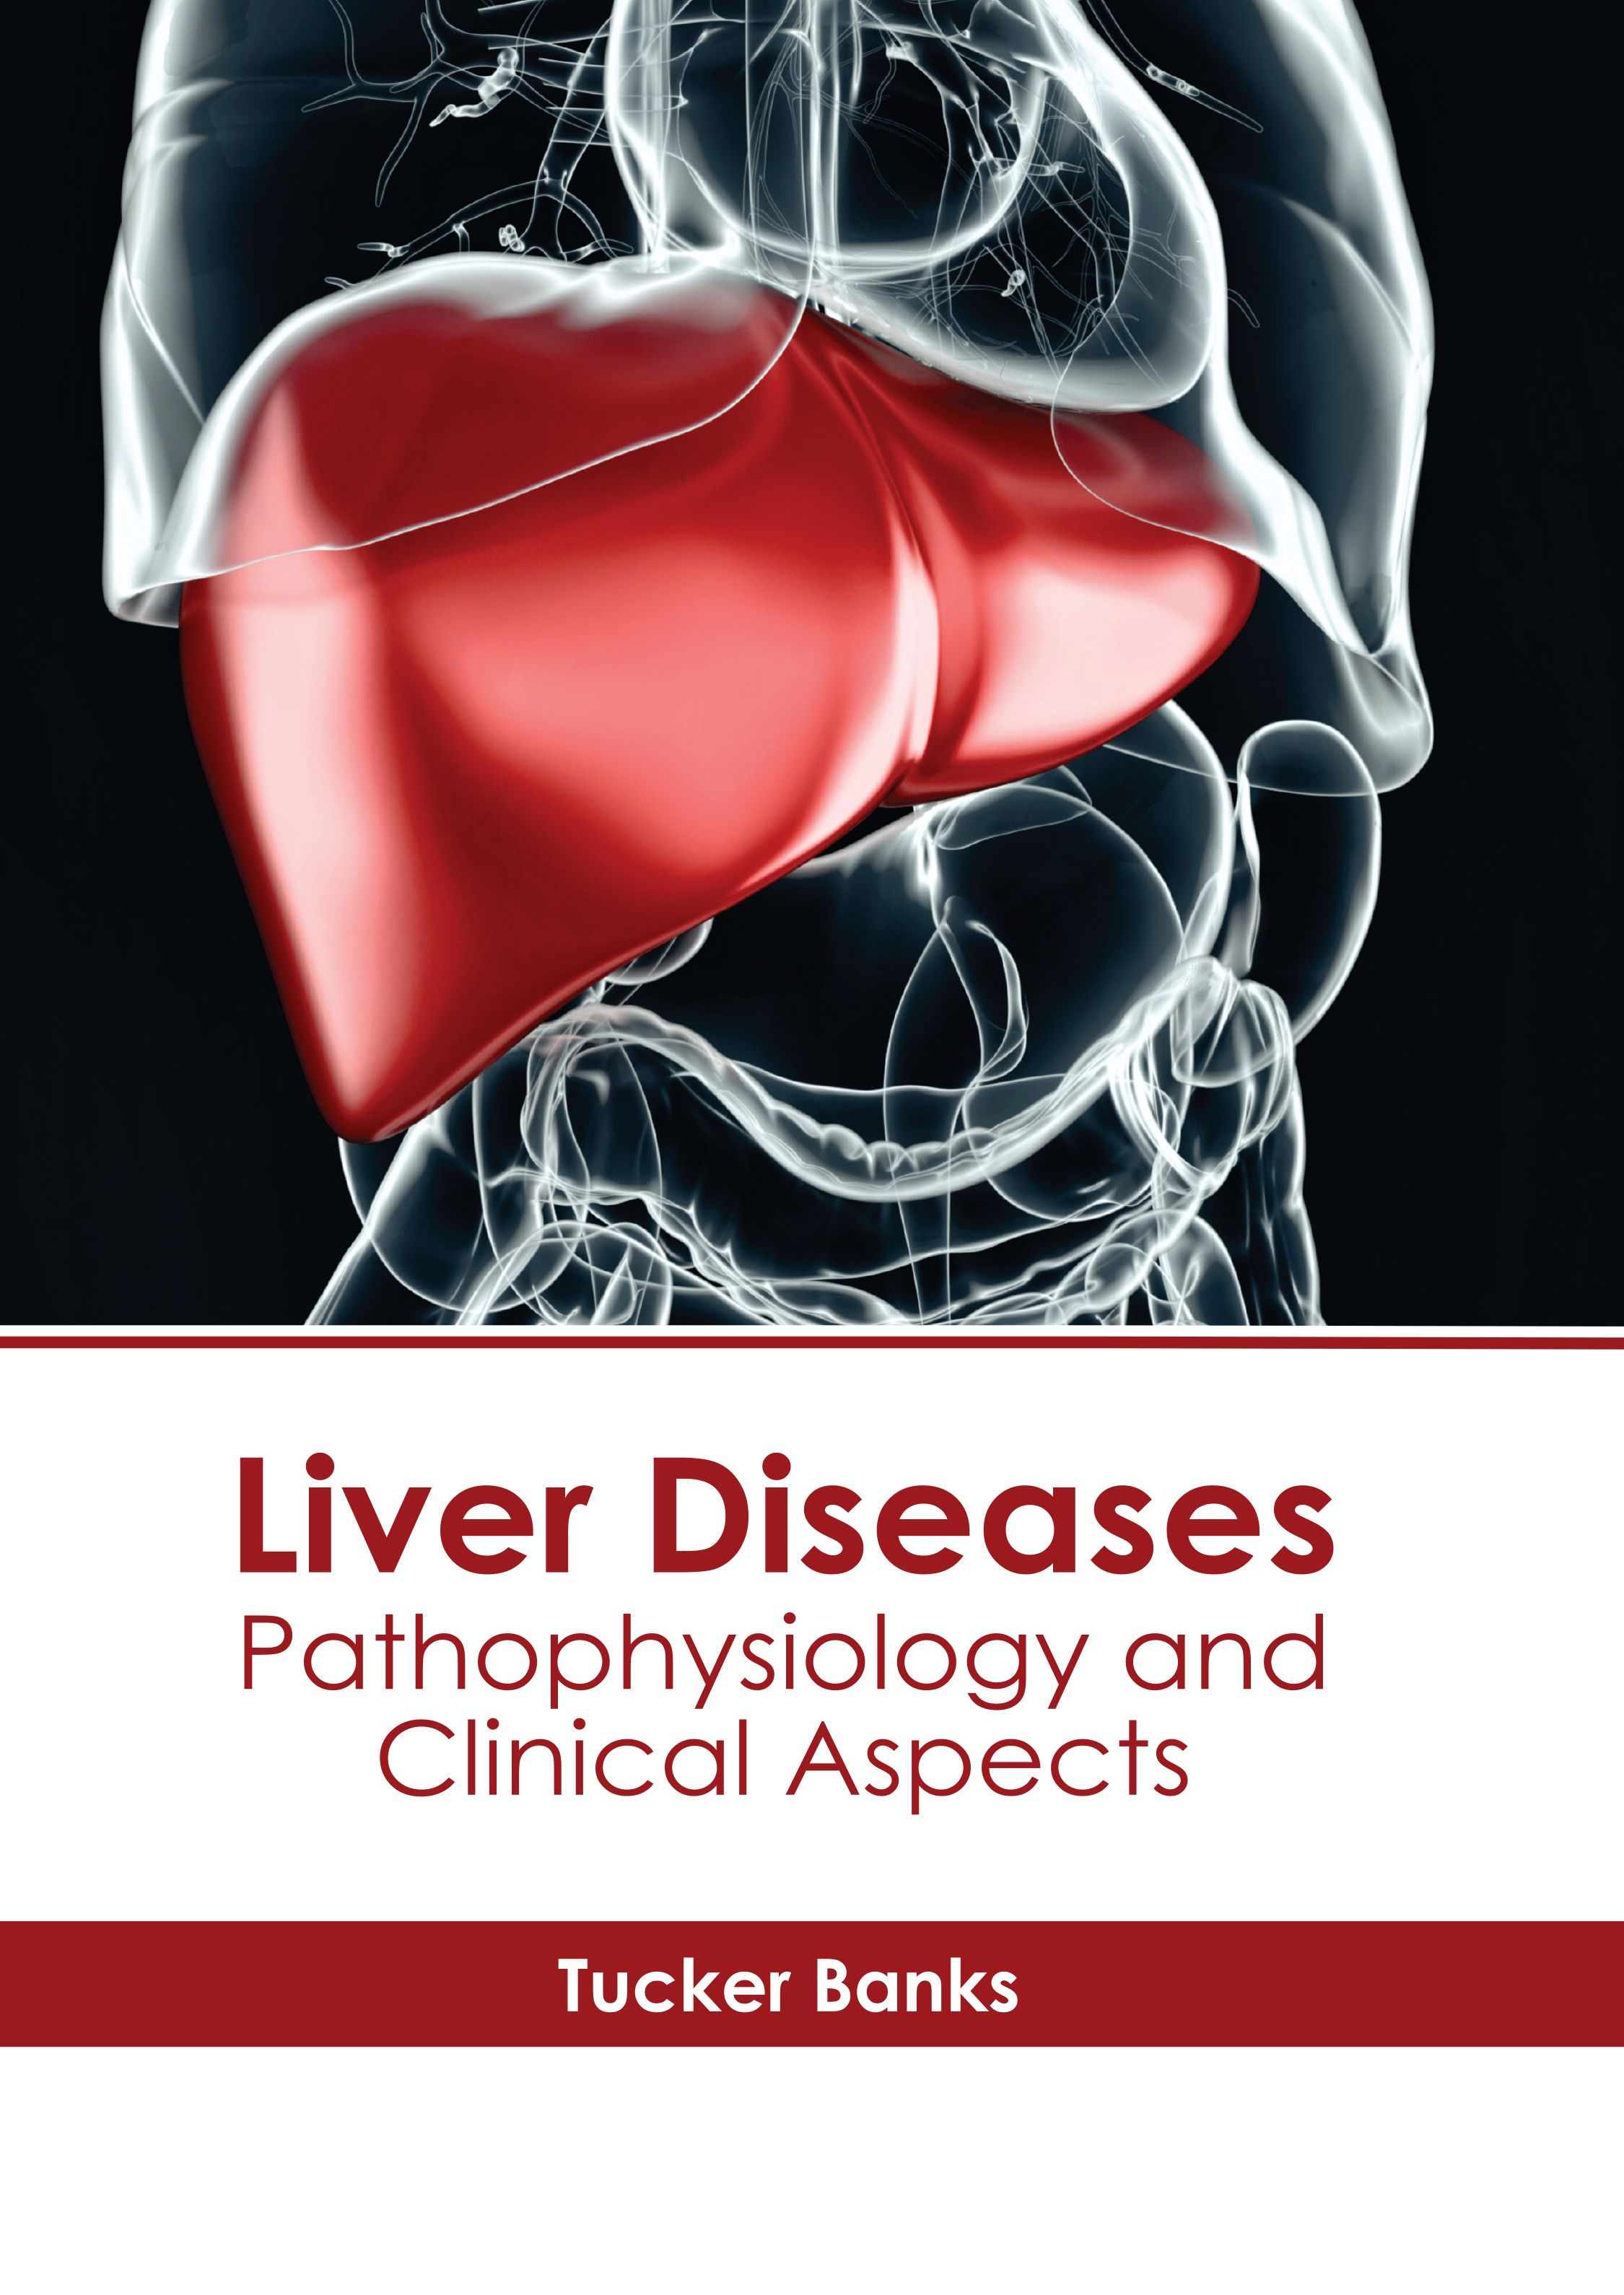 LIVER DISEASES: PATHOPHYSIOLOGY AND CLINICAL ASPECTS